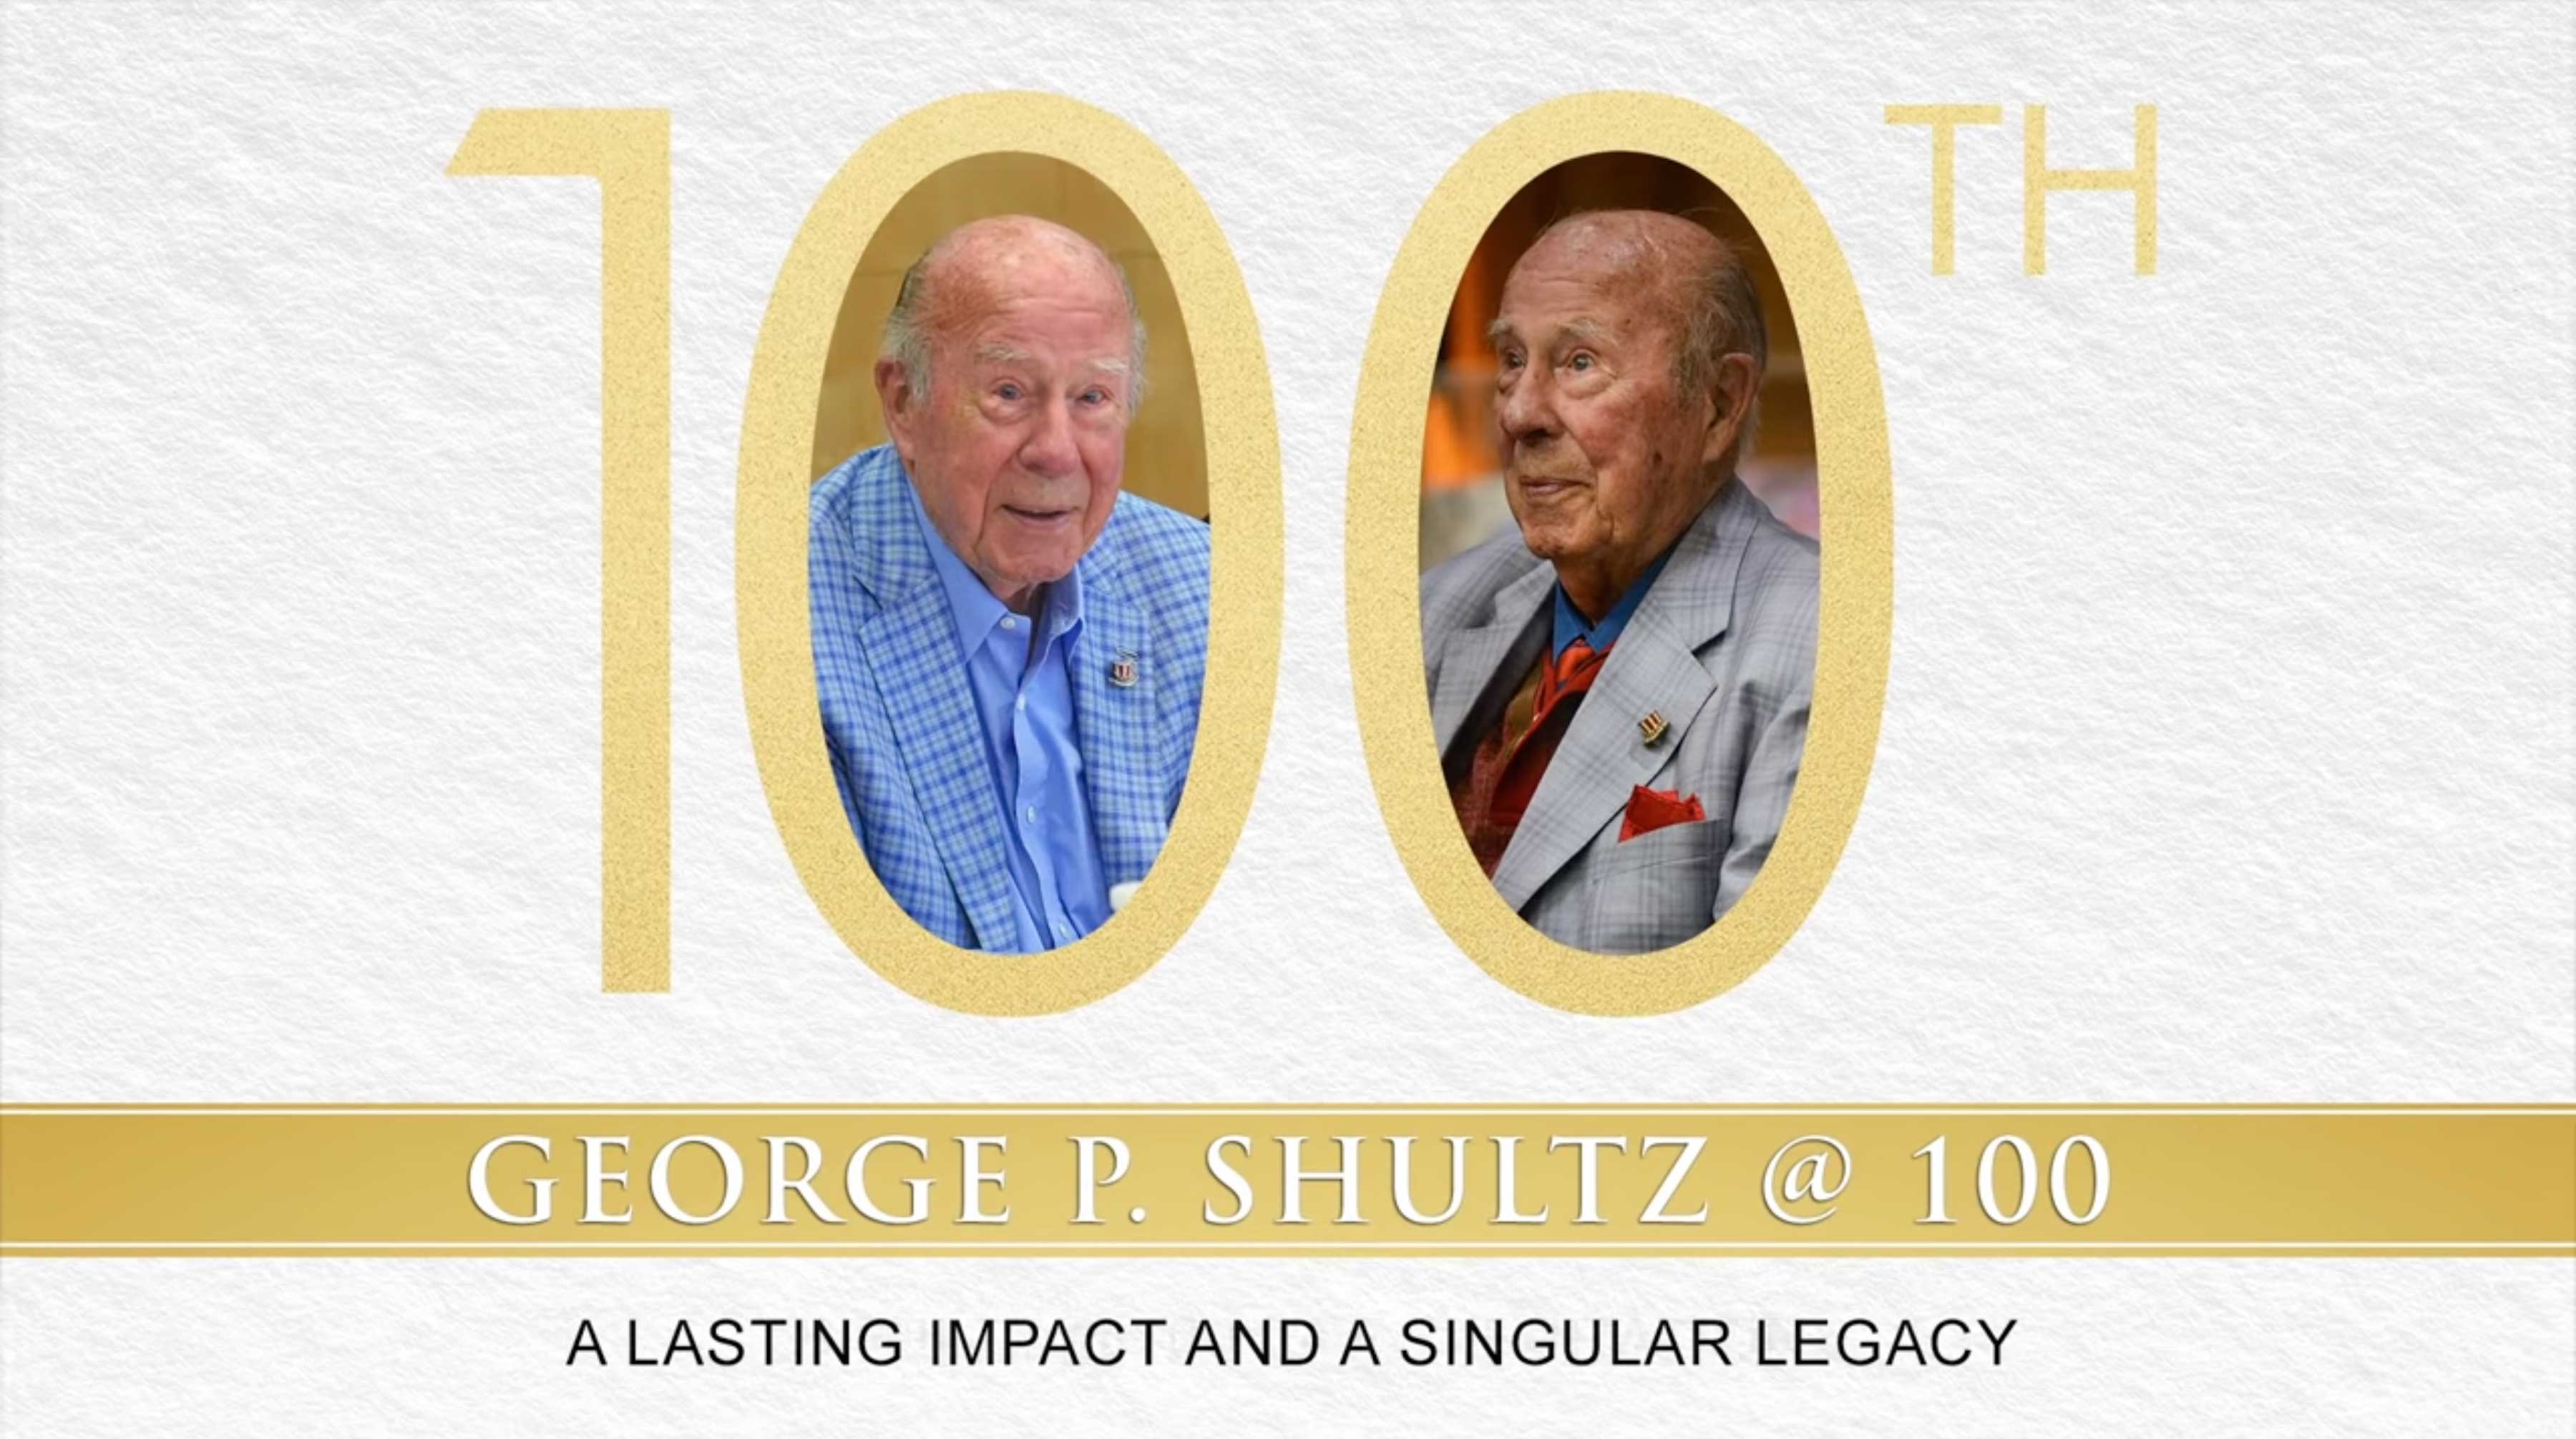 George P. Shultz at 100 | A Lasting Impact and a Singular Legacy